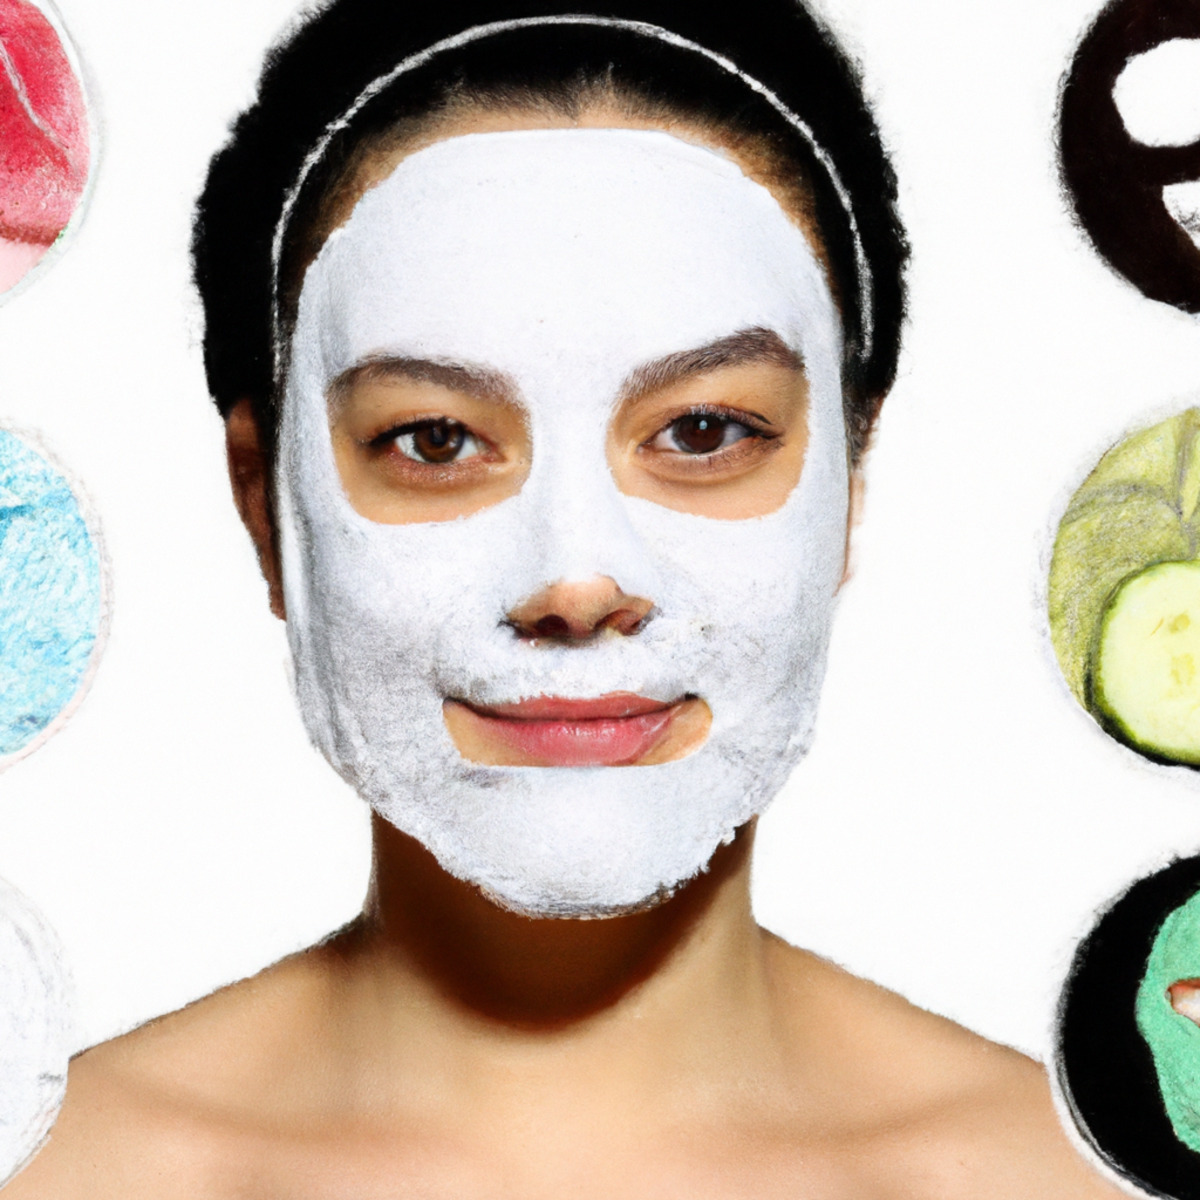 Multi-masking - Assorted face masks and tools on white background, showcasing vibrant colors and emphasizing proper application.